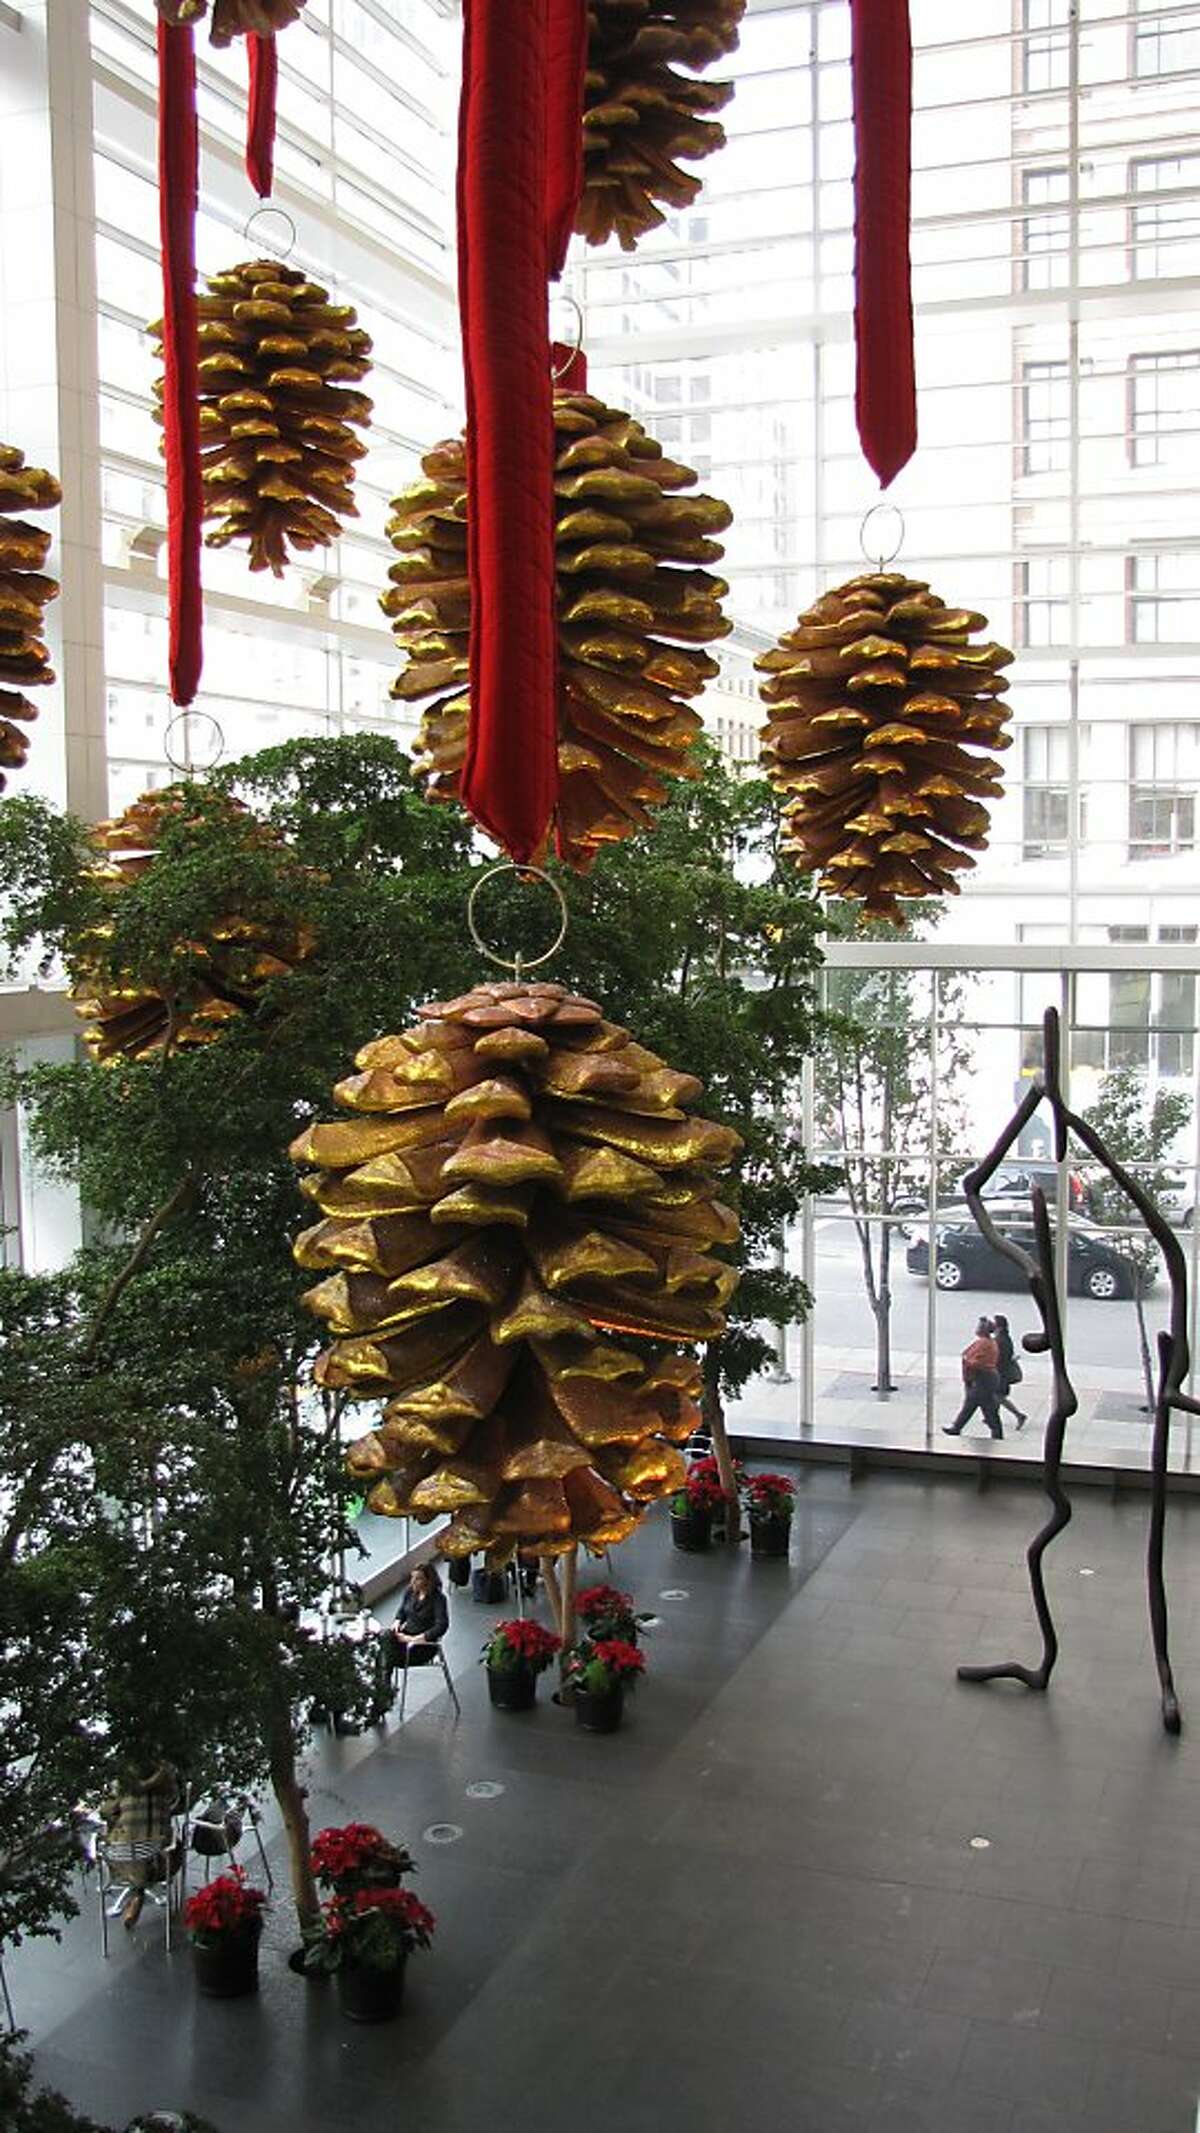 Financial District towers with large holiday decorations include 101 California St. with its tree ornaments, 345 California St. with a huge wreath and 101 2nd St. with huge pine cones hanging in its public "art pavilion."